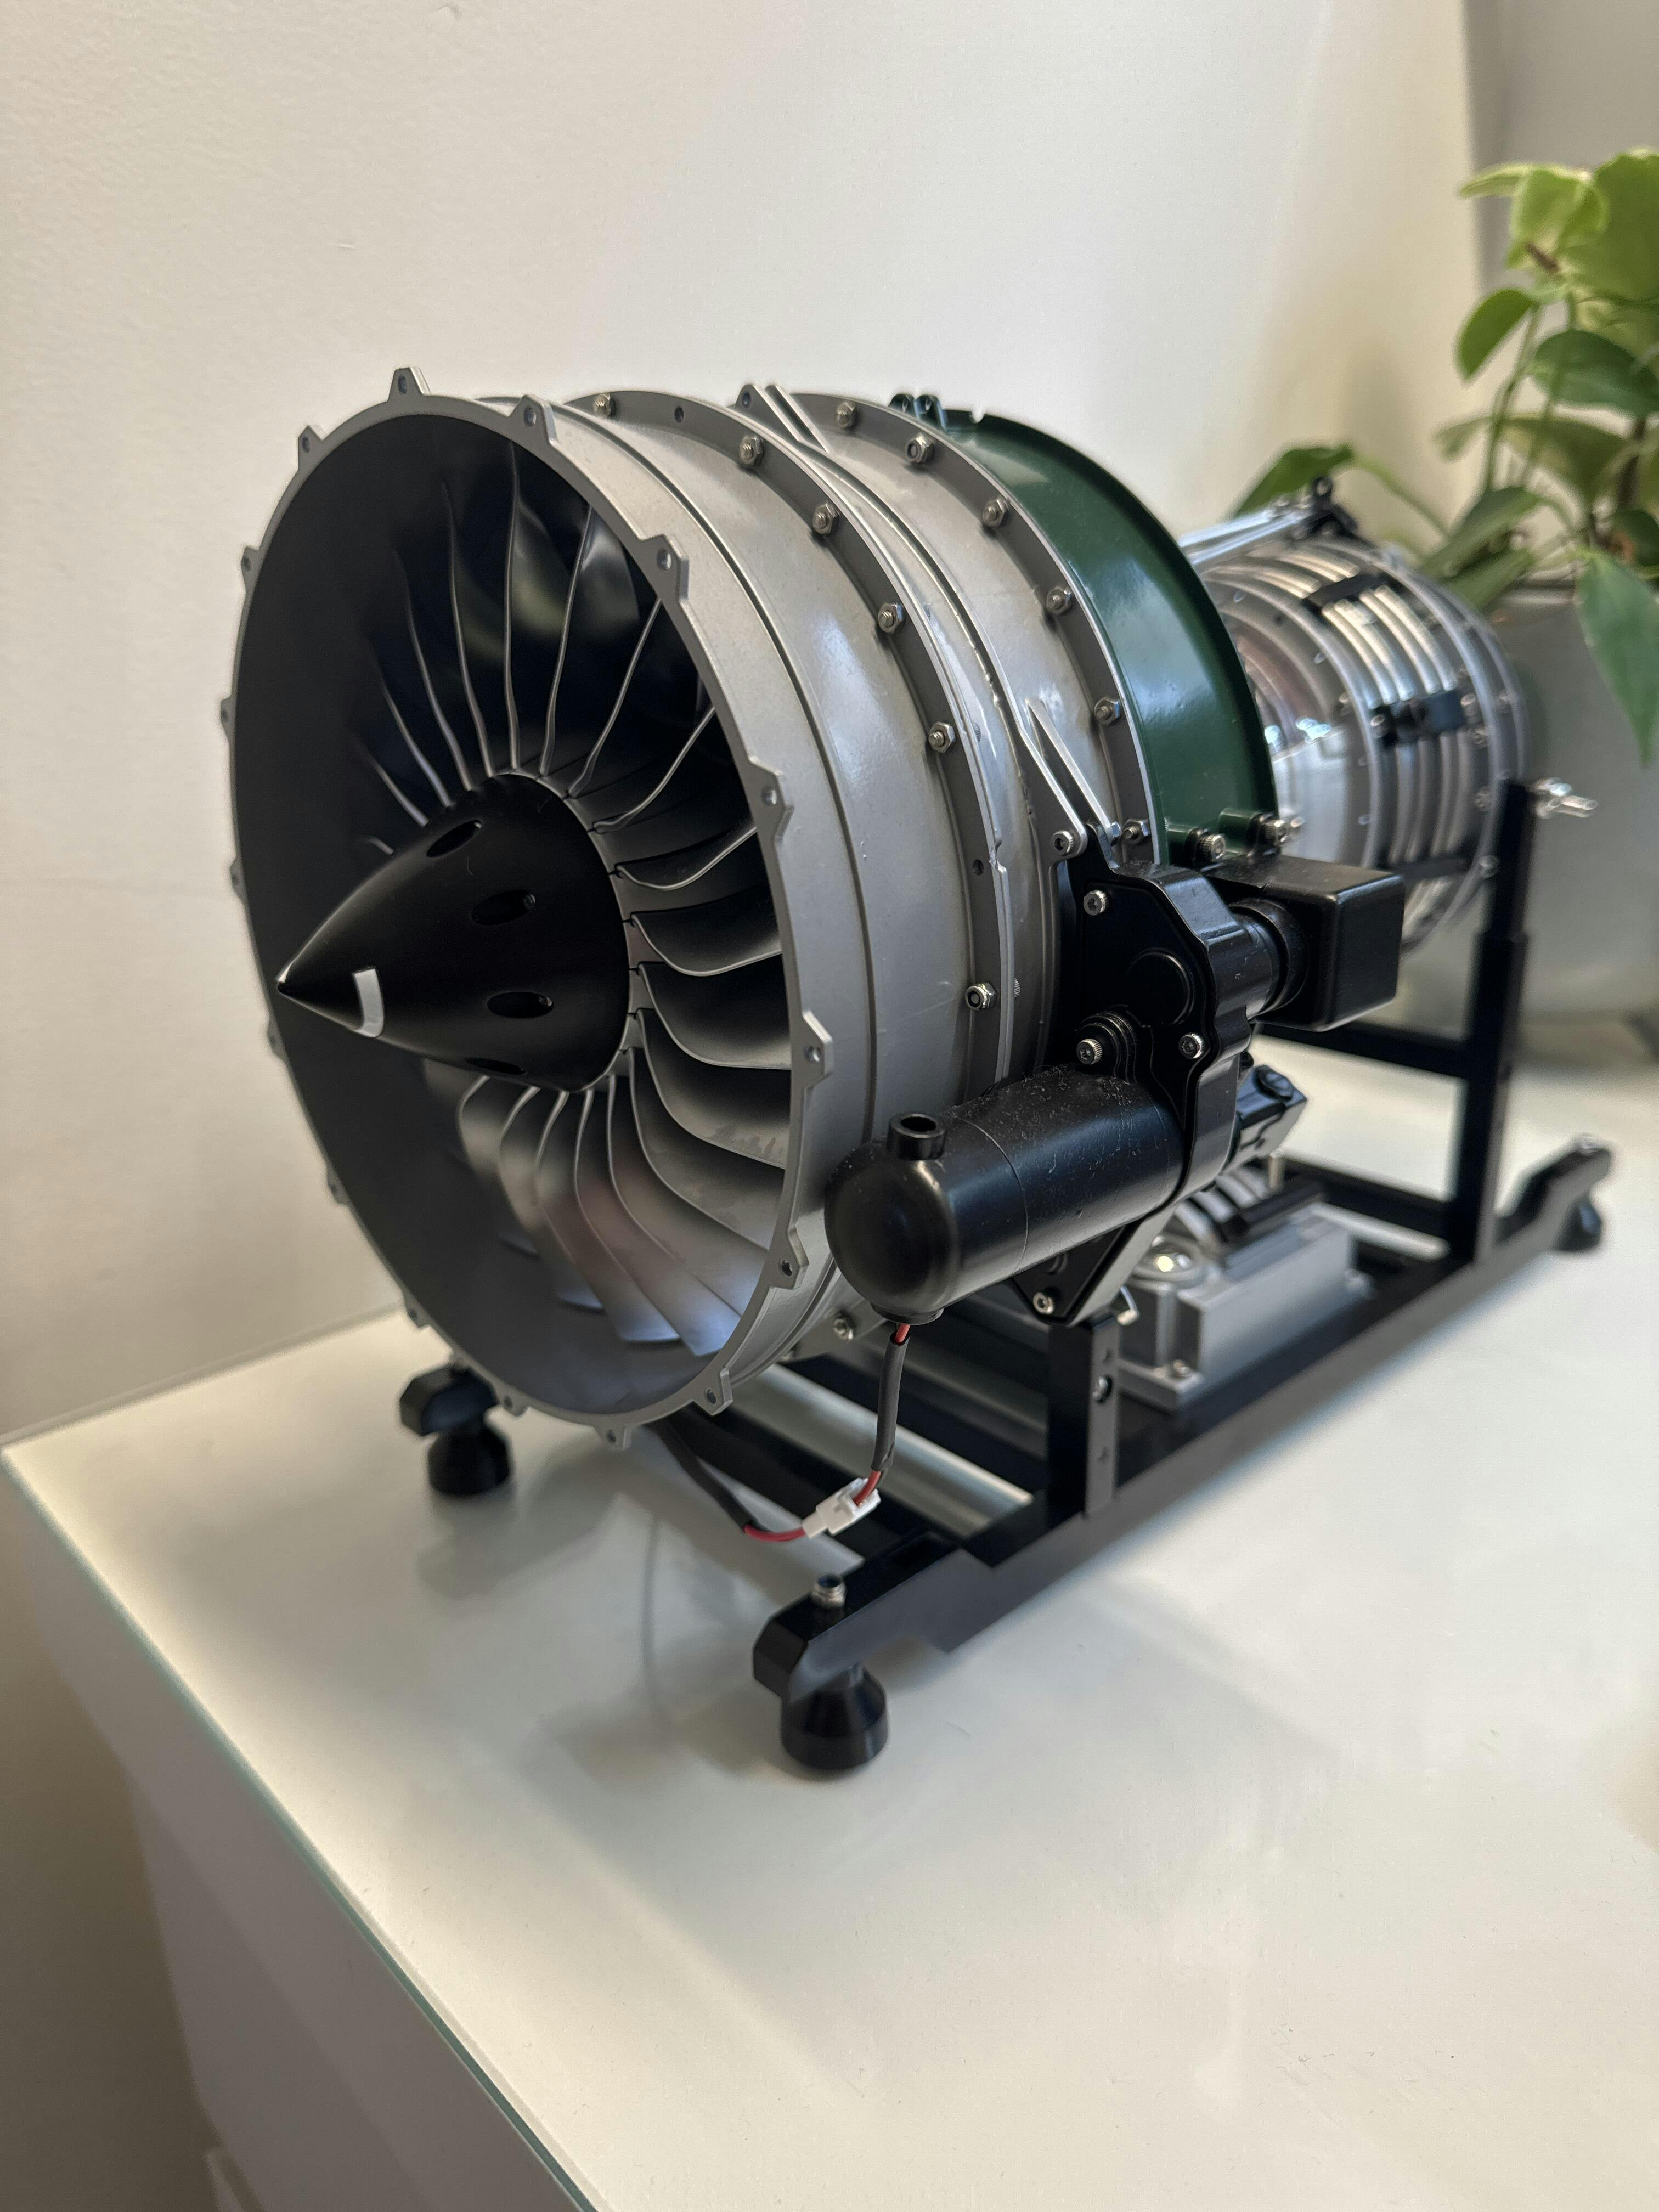 TECHING DIY Turbofan Jet Engine Model Kit - 1/10 Scale Full Metal Dual-Spool Aircraft Engine Assembly Model with Over 1000 Parts photo review